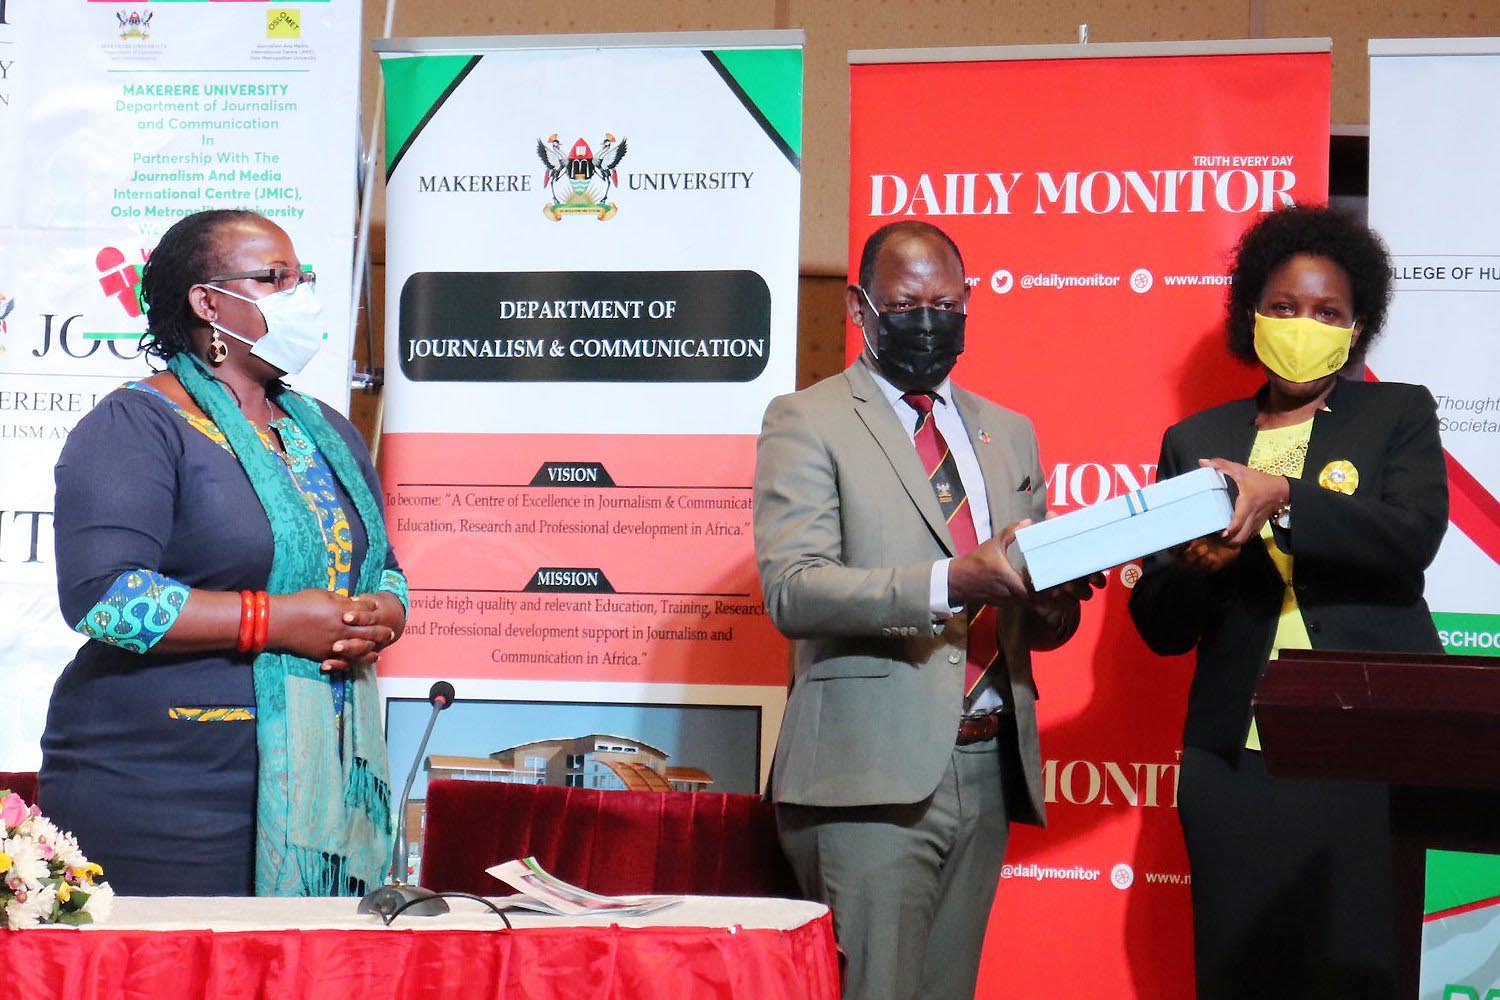 The Vice Chancellor, Prof. Barnabas Nawangwe (C) hands over a gift to the Minister of ICT and National Guidance-Hon. Judith Nabakooba (R) during the Annual Media Convention as Principal CHUSS-Dr. Josephine Ahikire (L) witnesses on 3rd May 2021, CTF2 Auditorium, Makerere University.